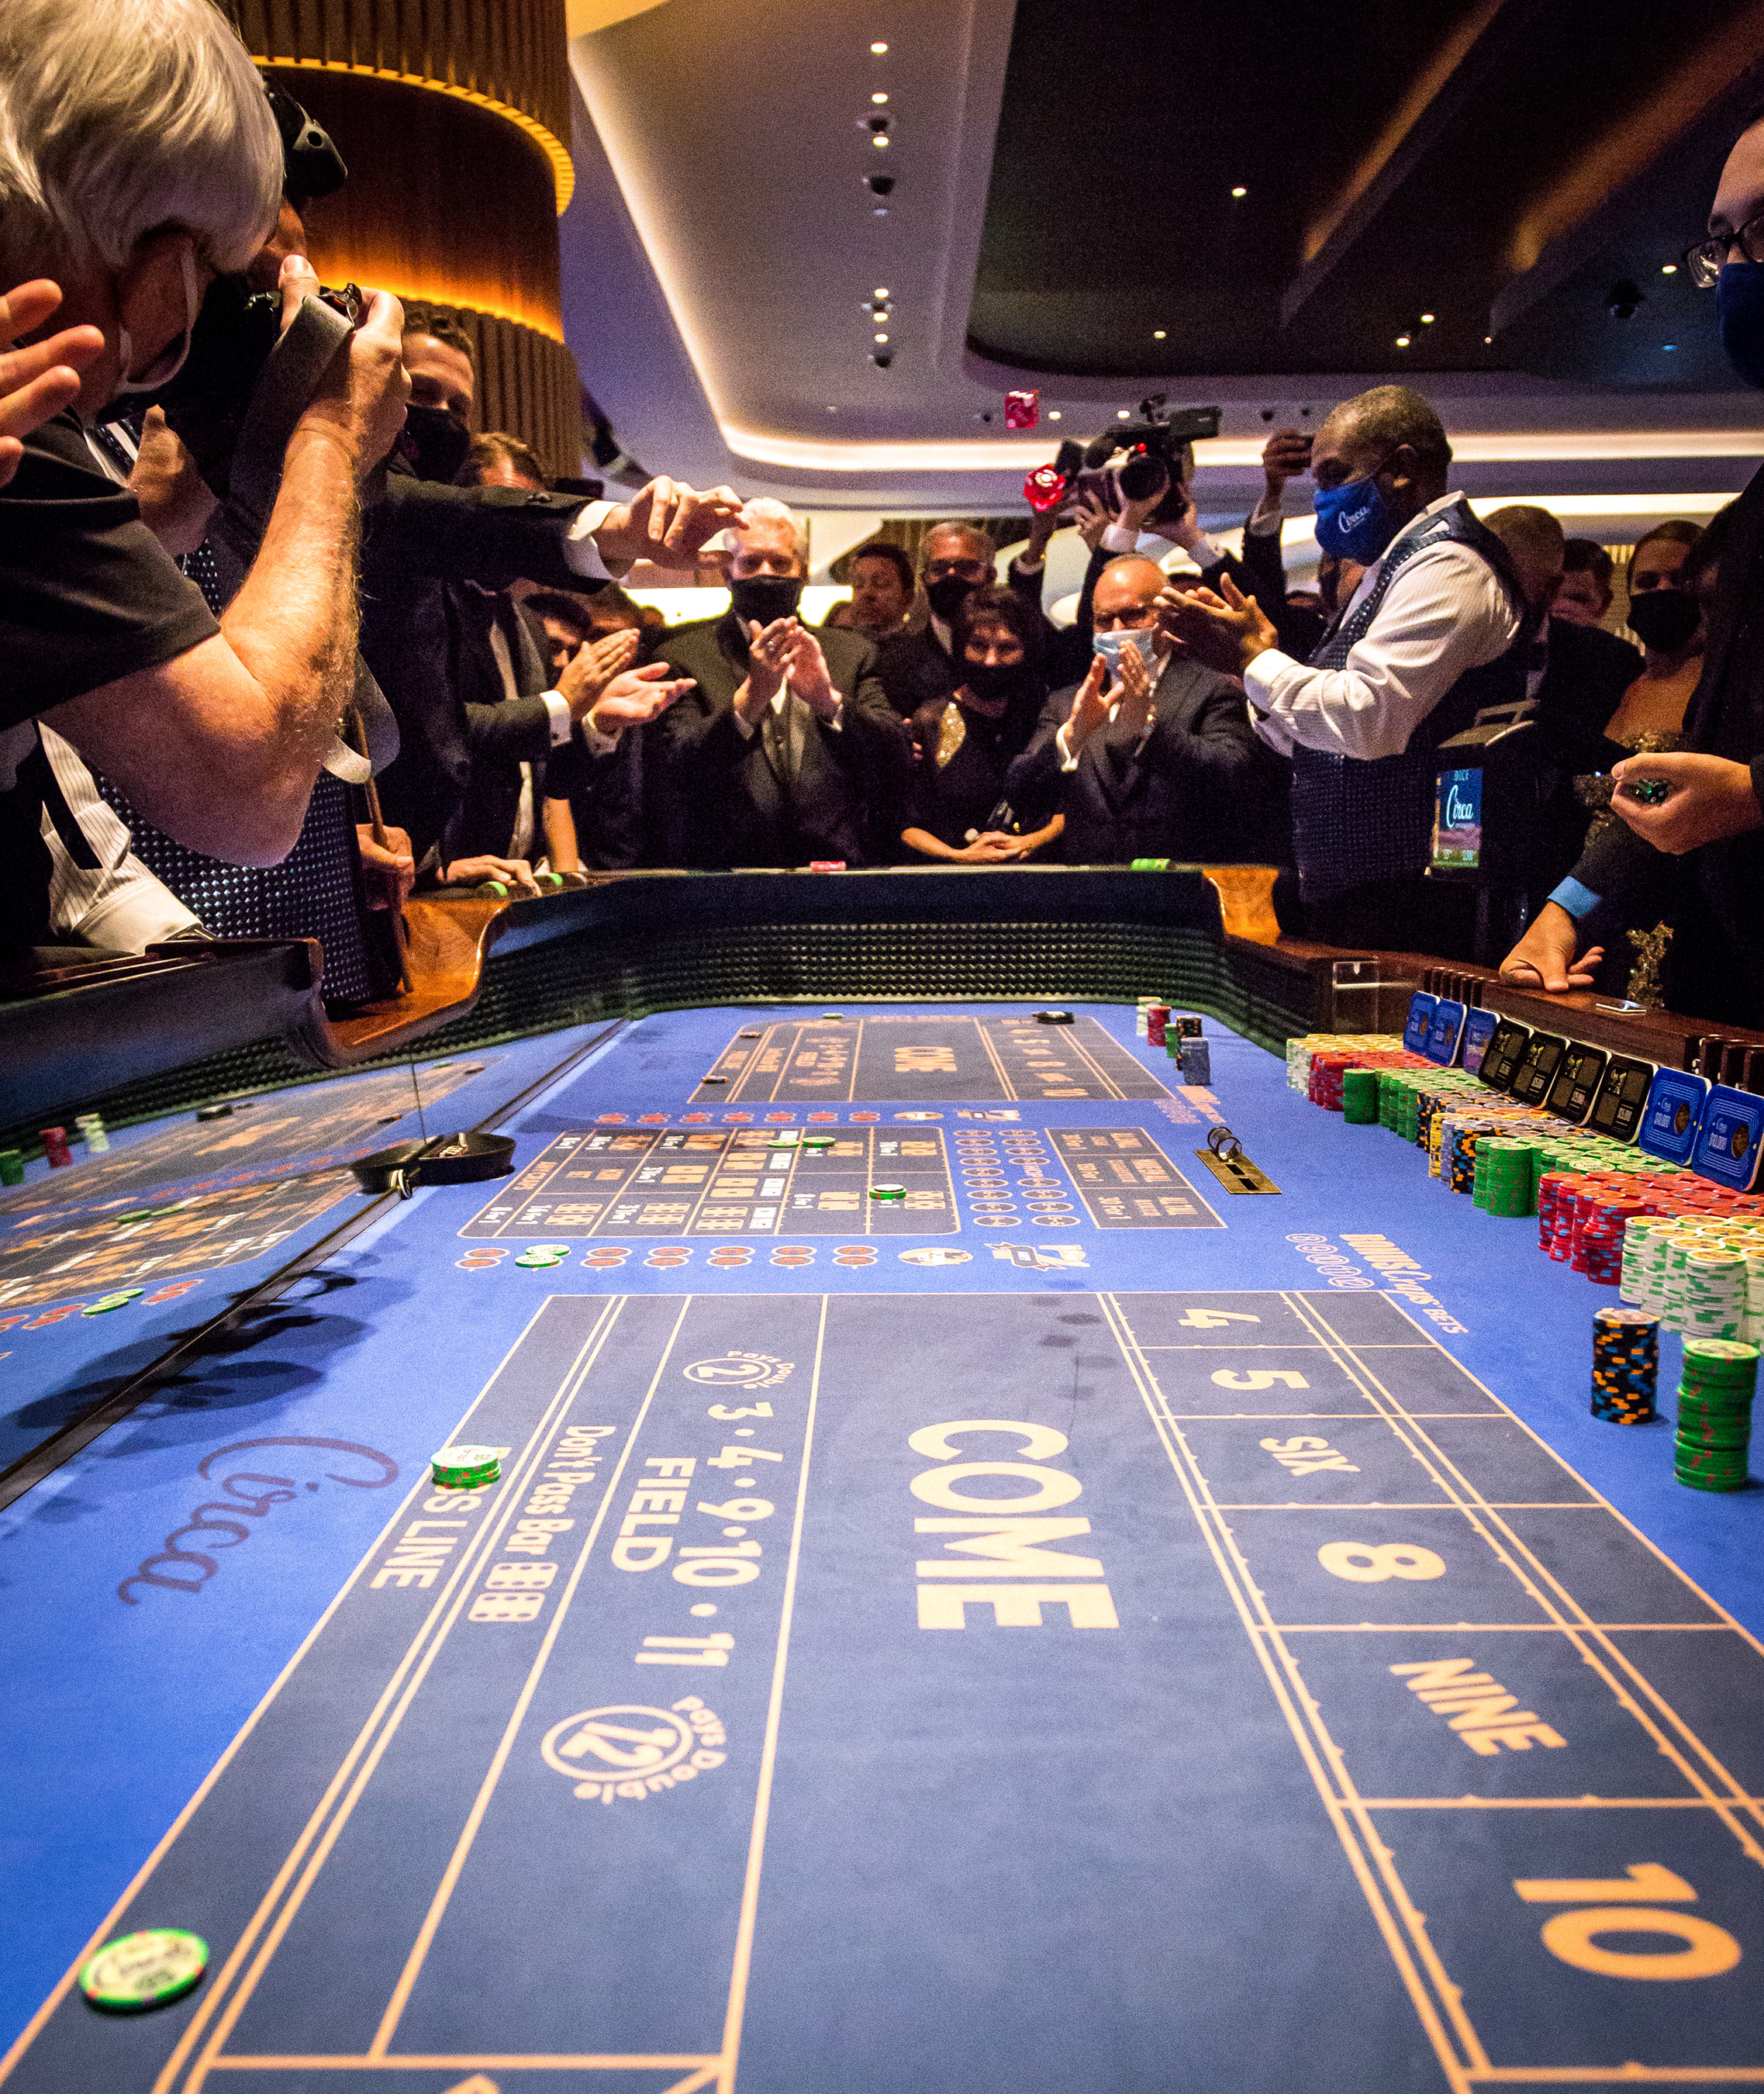 Casino table with people